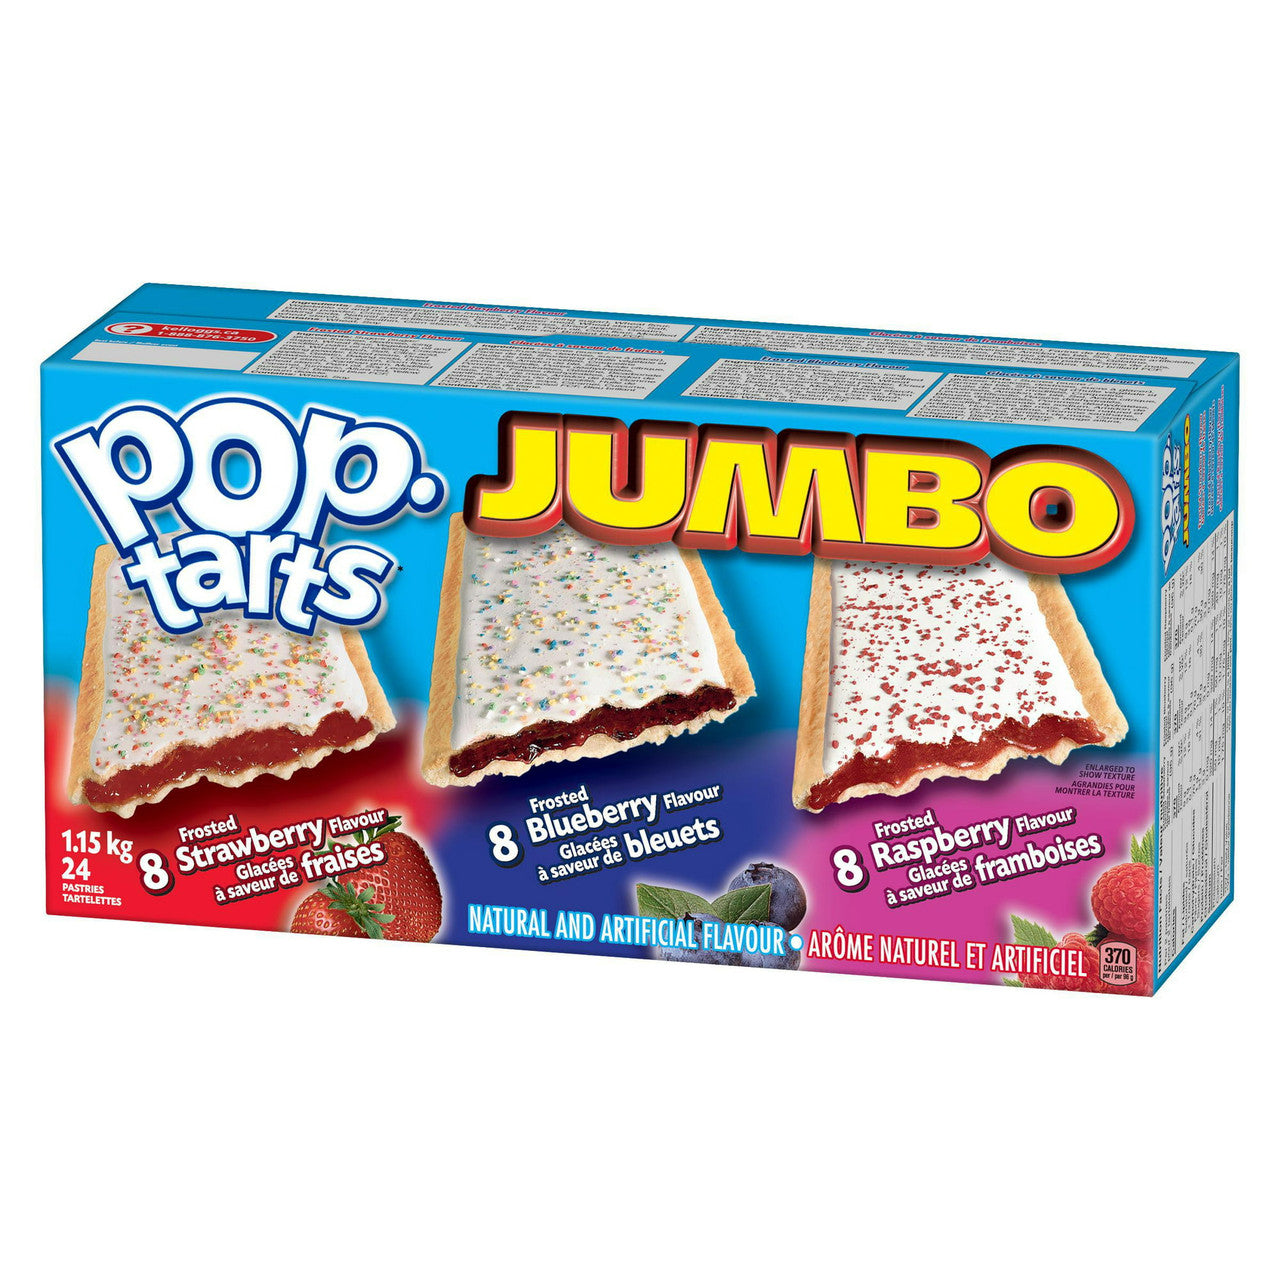 Pop-Tarts Frosted S'mores Toaster Pastries, 8 ct / 1.69 oz